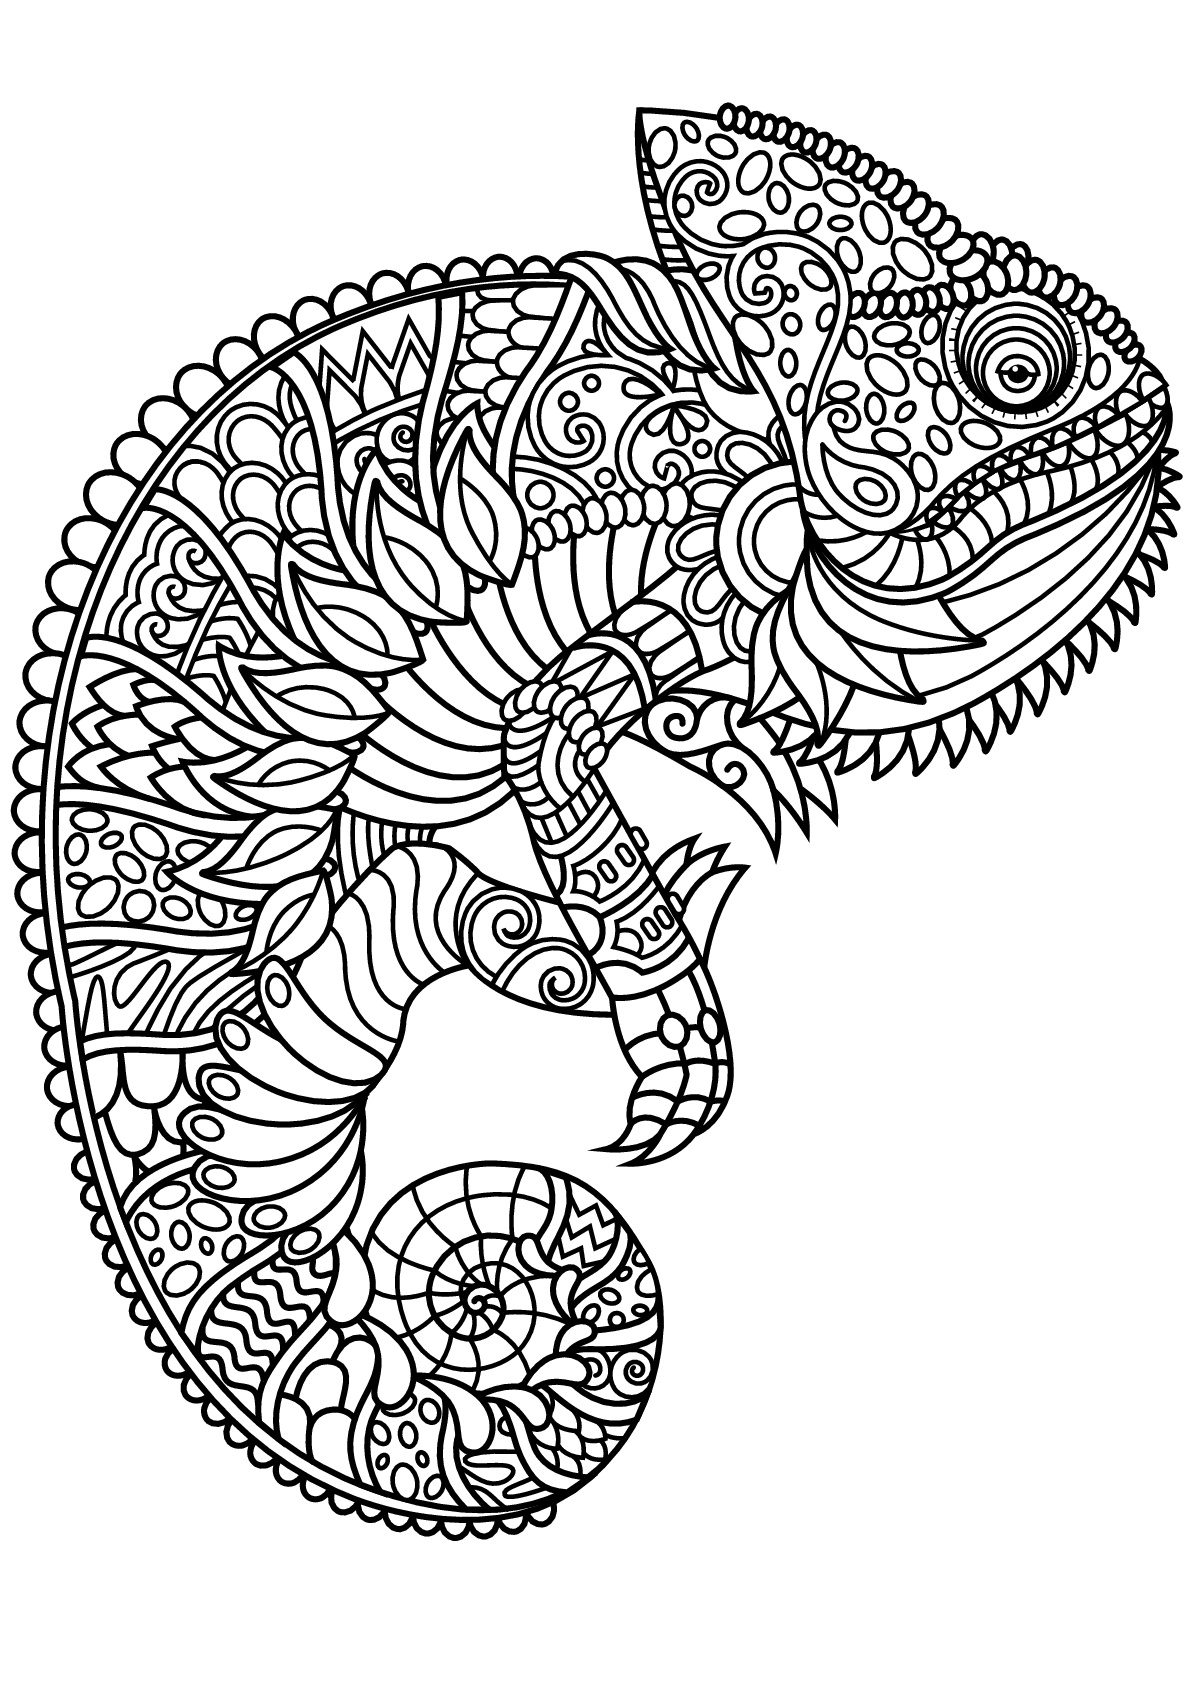 Chameleon, with complex and beautiful patterns